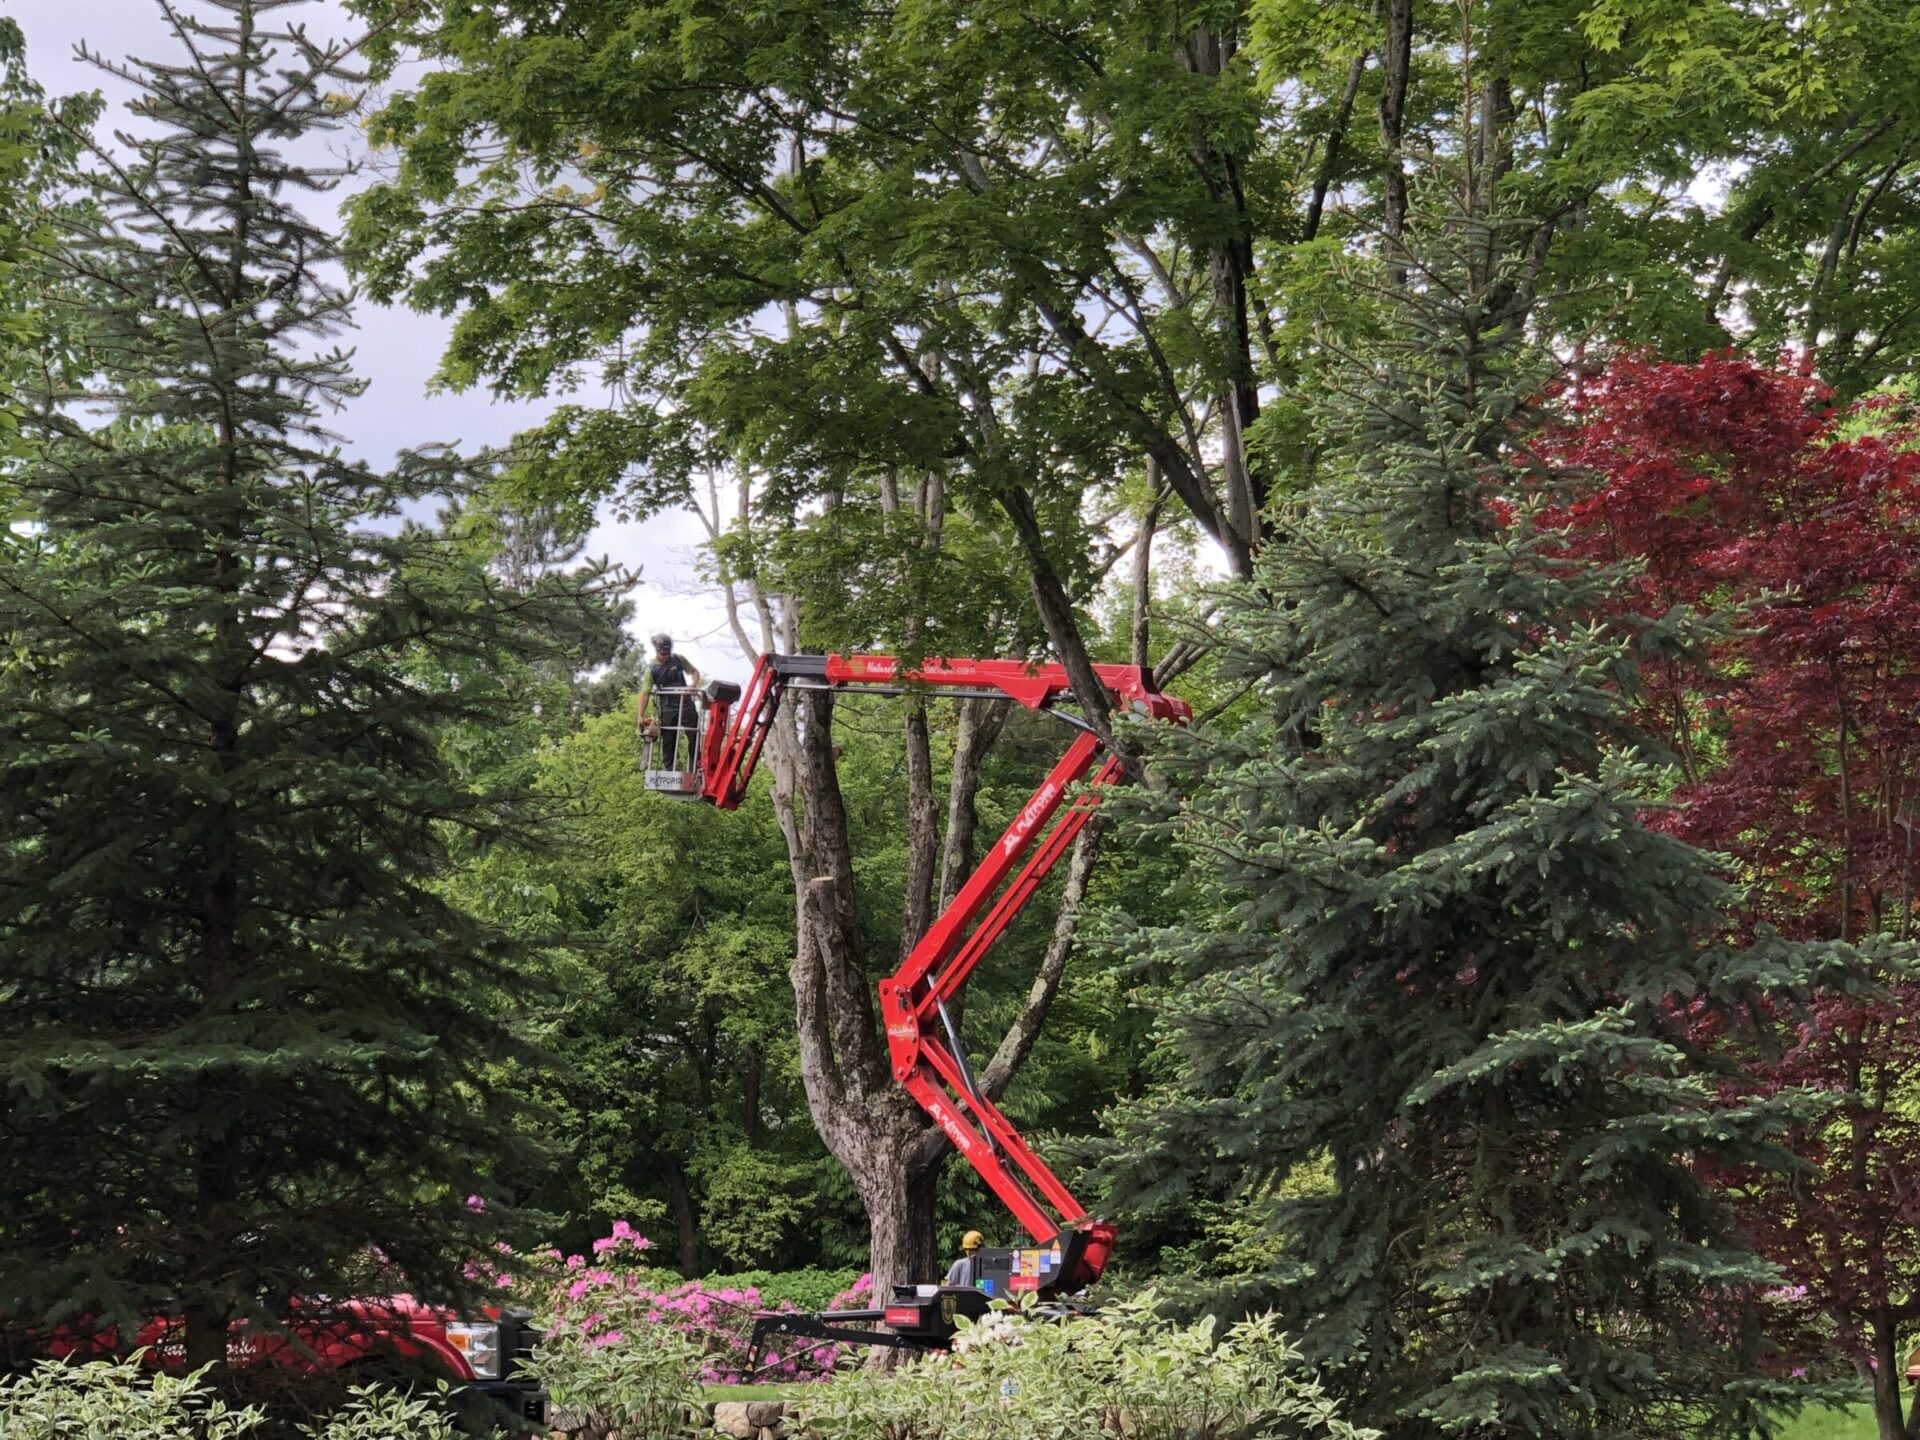 A person operates a red cherry picker among lush greenery with a mix of coniferous and deciduous trees under an overcast sky.